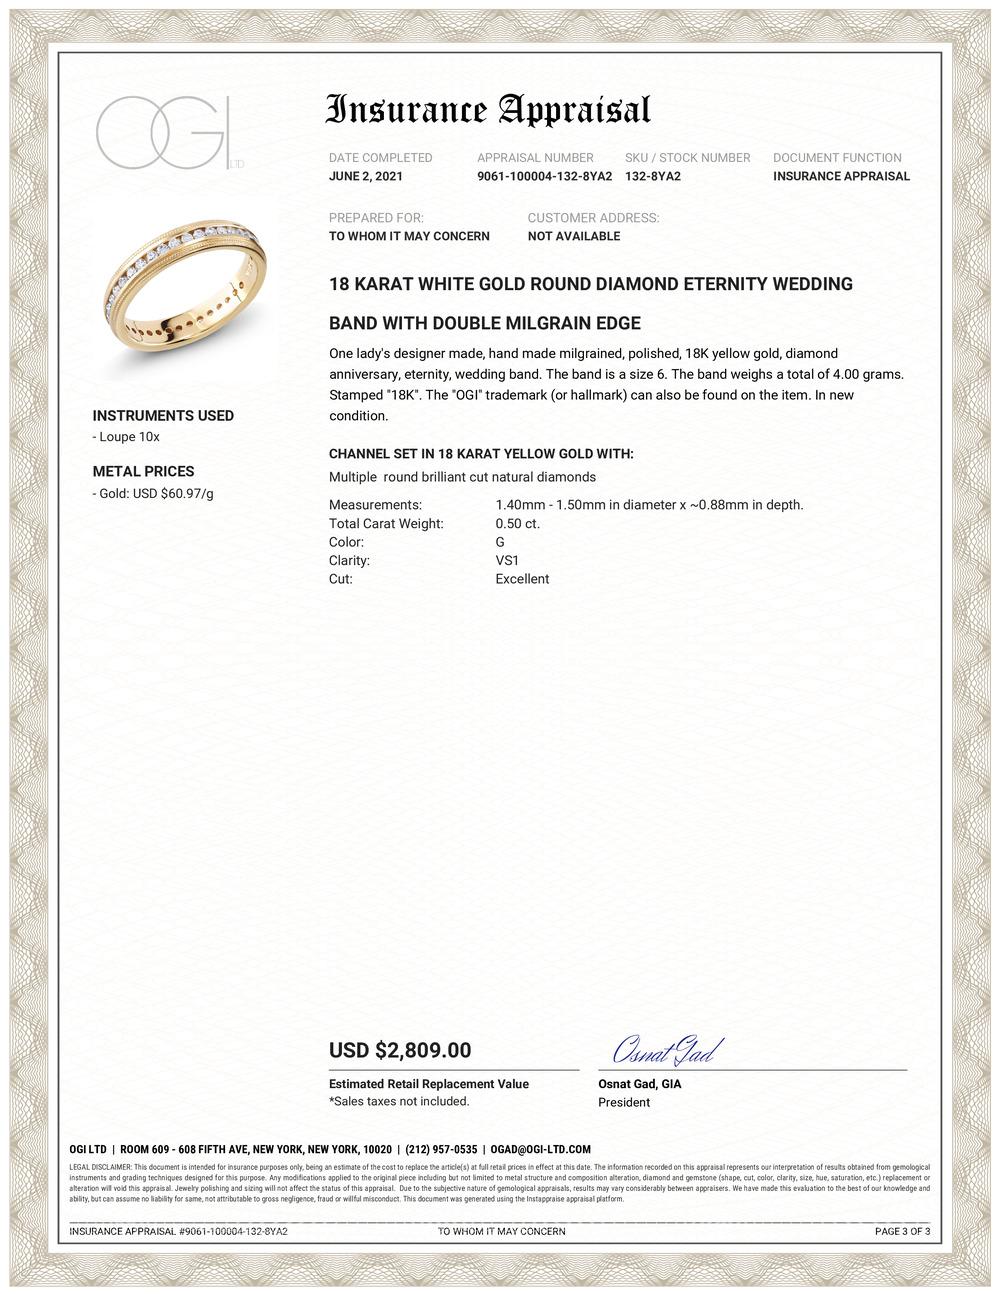 18 Karat Yellow gold diamond eternity wedding band 
Diamond weighing 0.50 carat 
Double milgrain edge
Width of band 3.5 mm 
Diamond quality G VS
Our team of graduate gemologists carefully hand-select every diamond 
Ring size 6 In Stock
New Ring
The